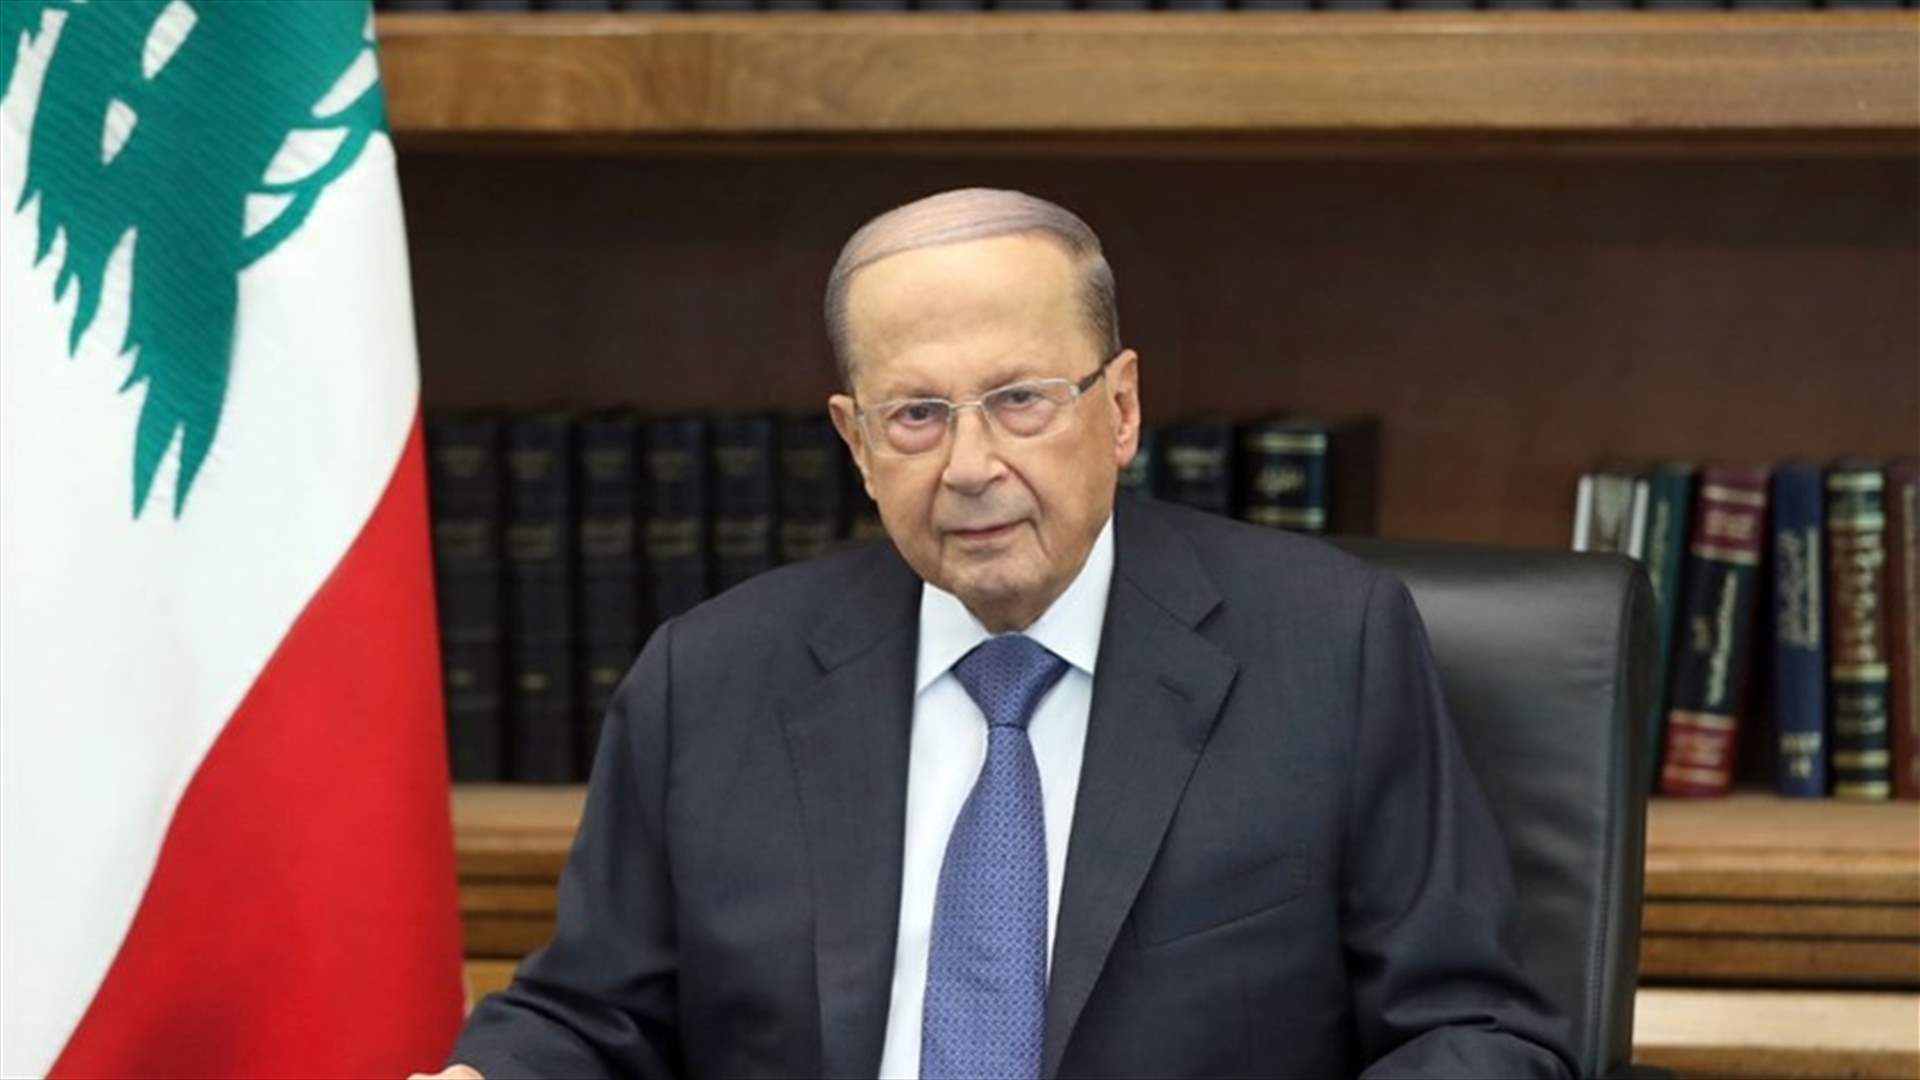 Aoun meets Education Minister, discusses telecom matters with Corm